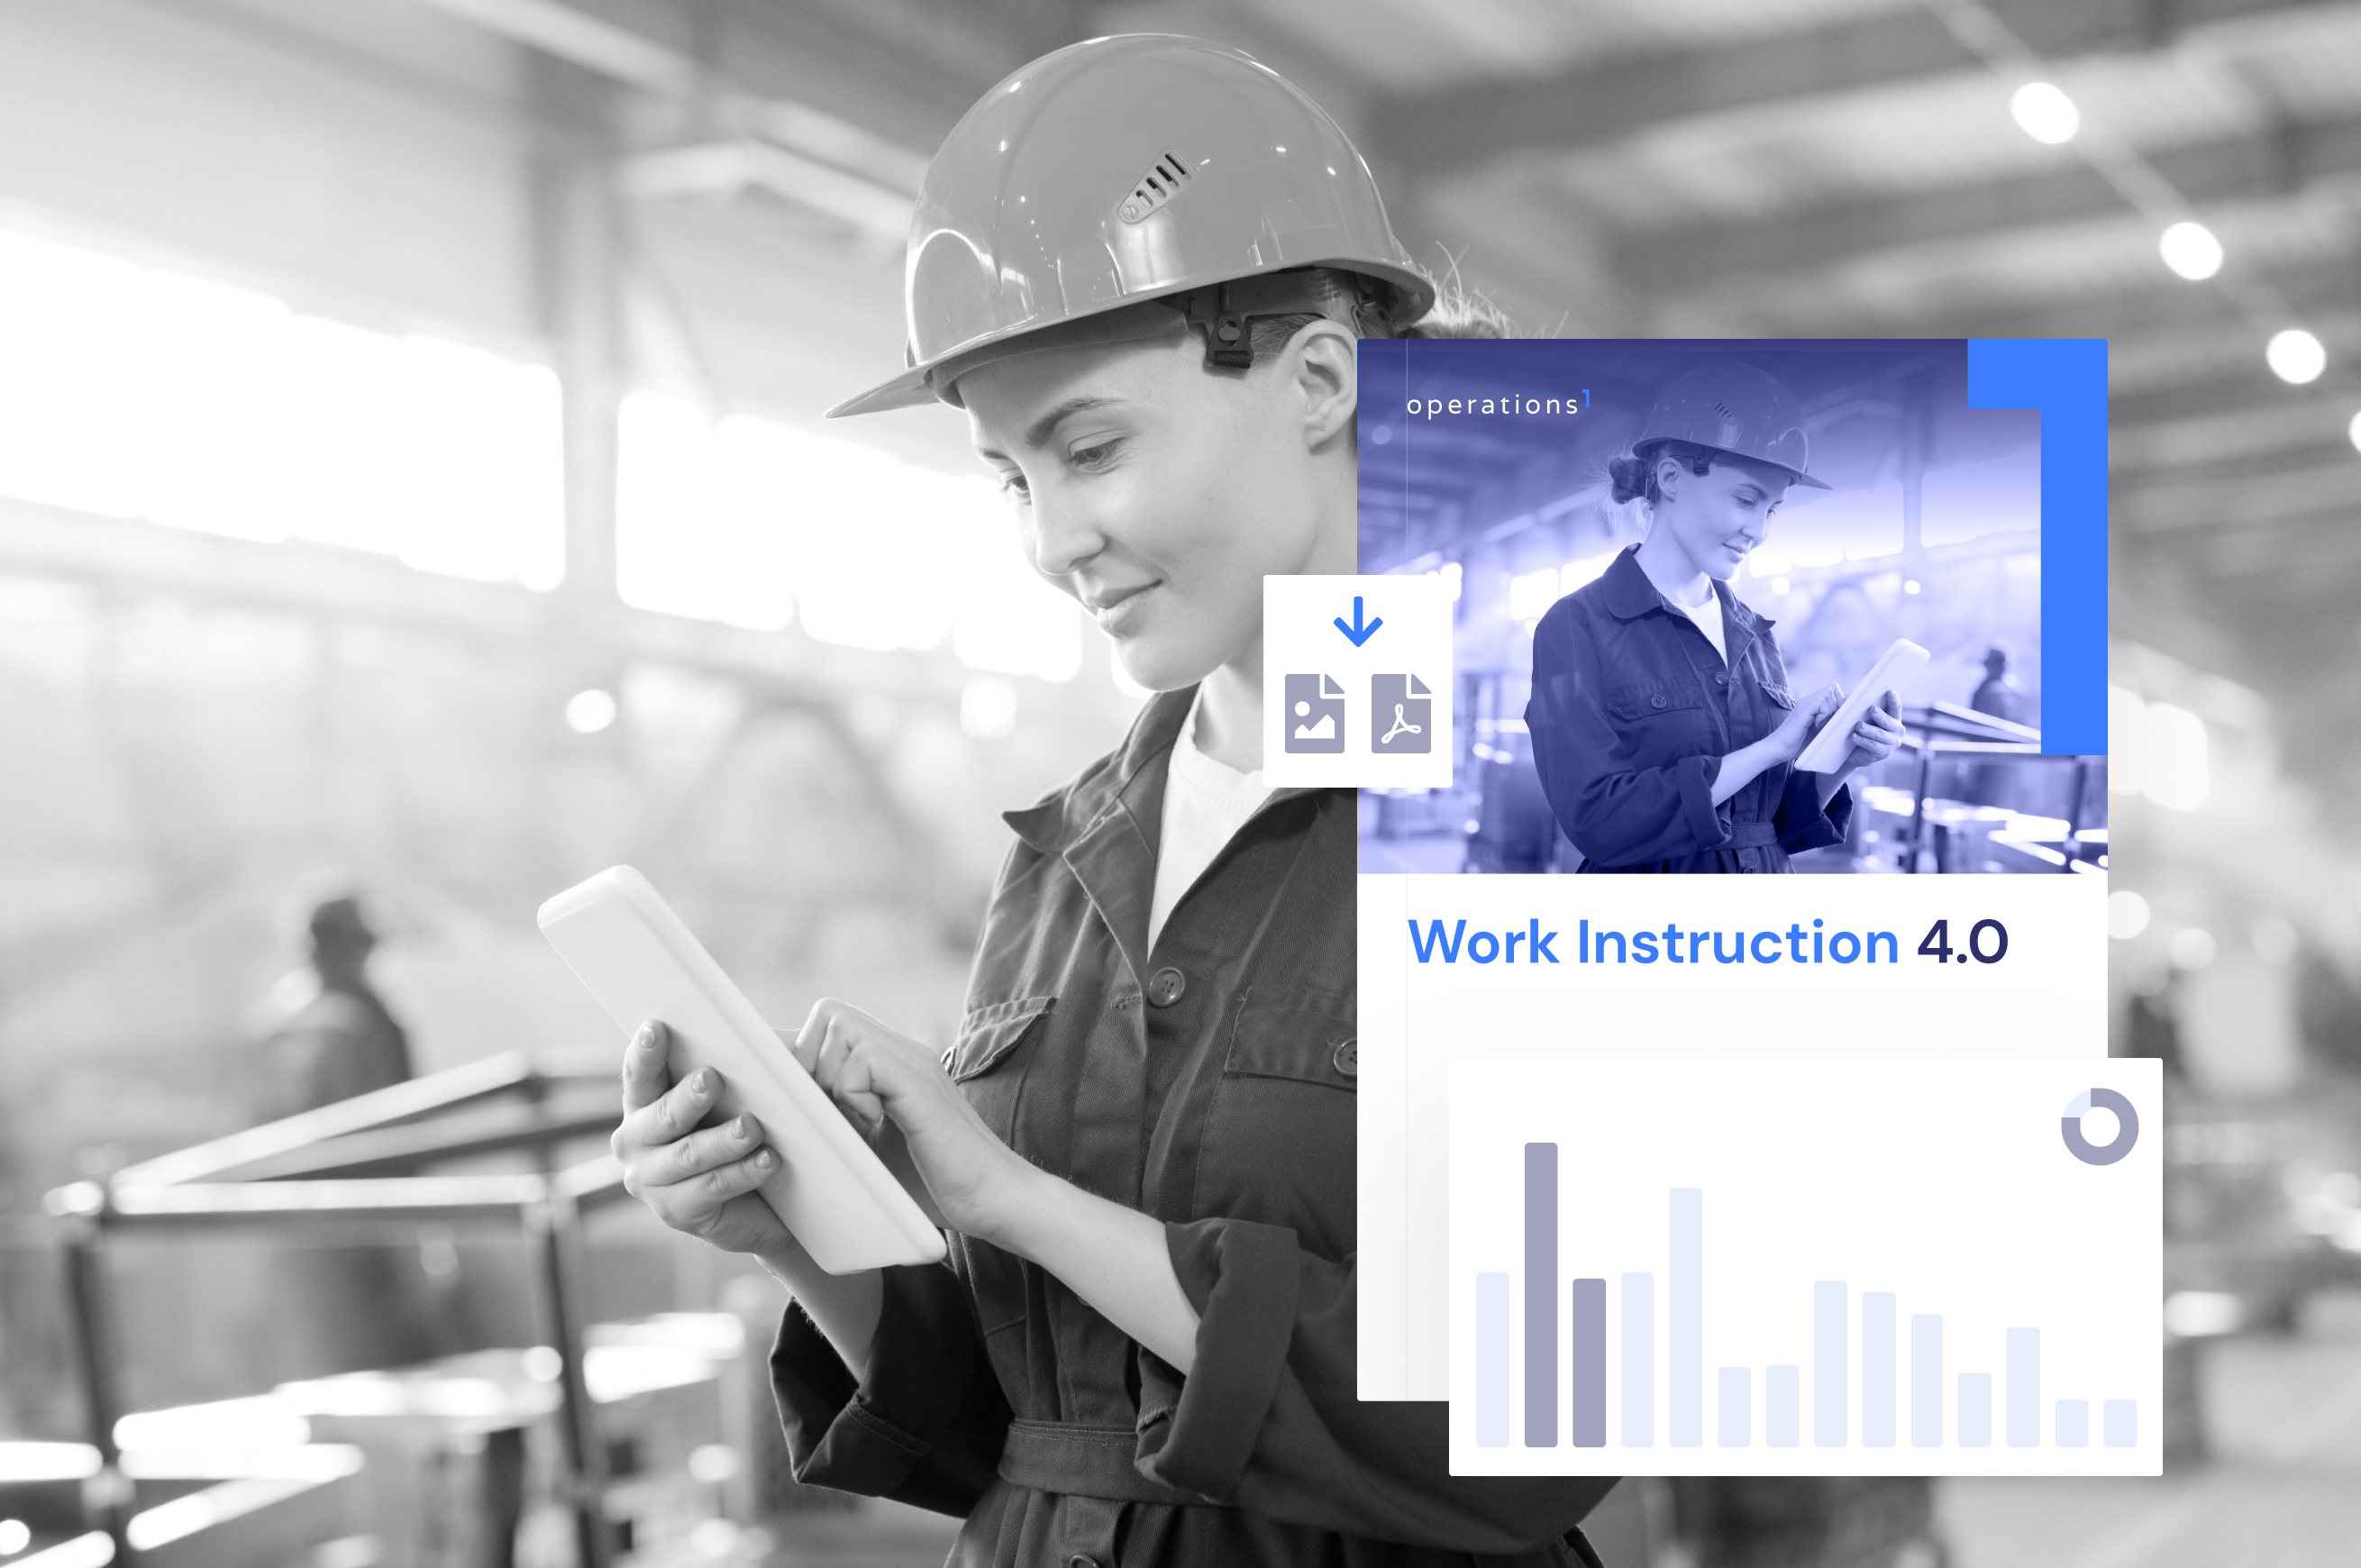 Download the work instruction 4.0 e-paper